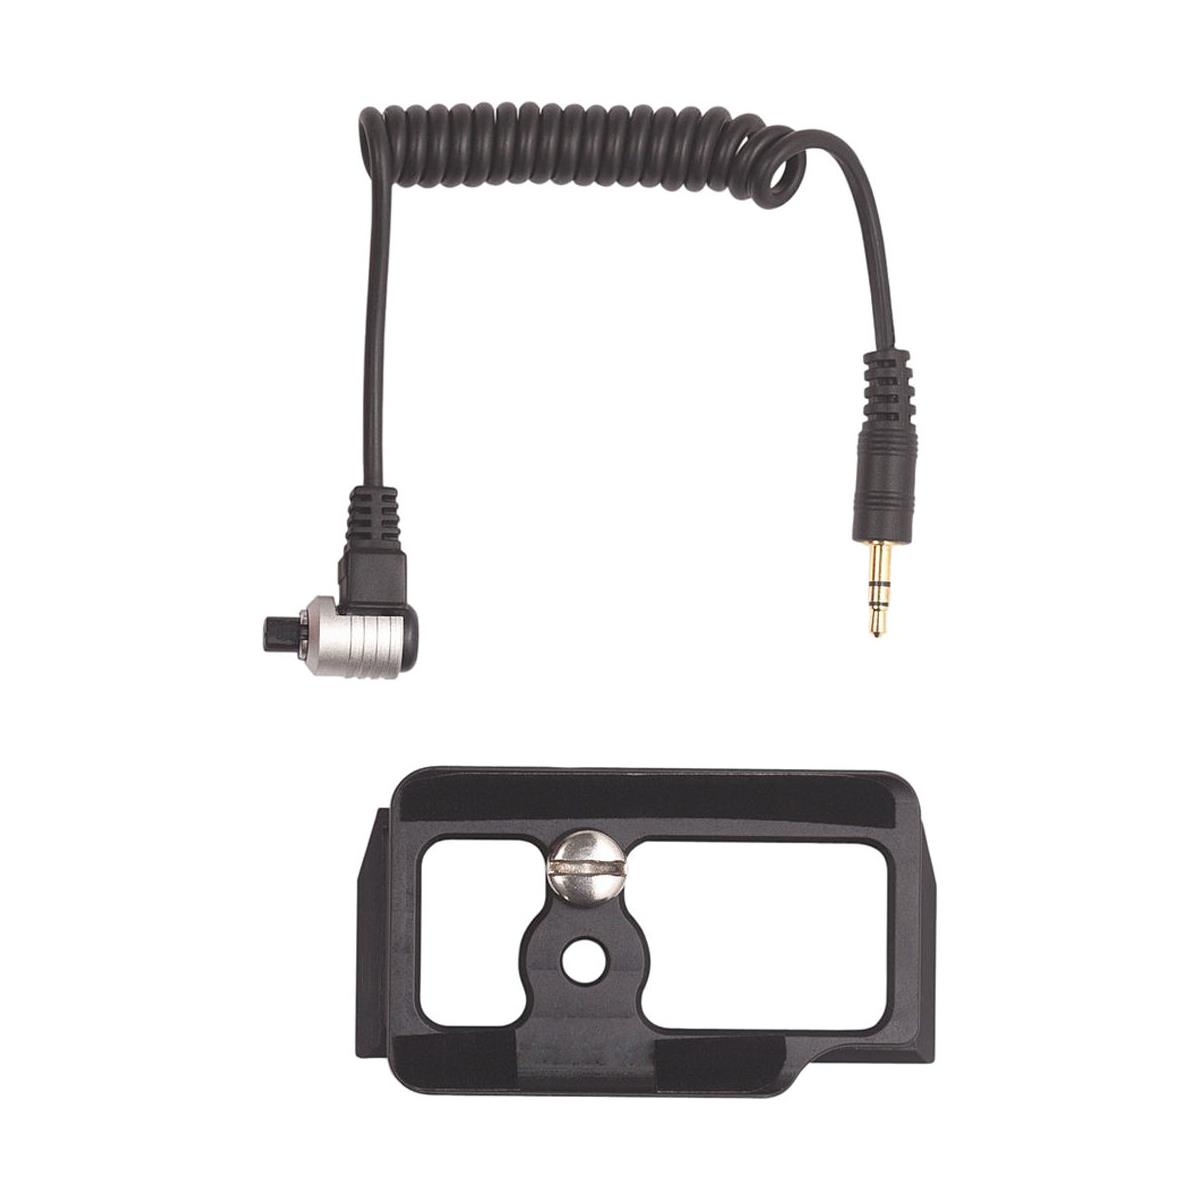 AquaTech Cable Release and Camera Plate Kit for FUJIFILM X-H1 in Base Housing -  11135